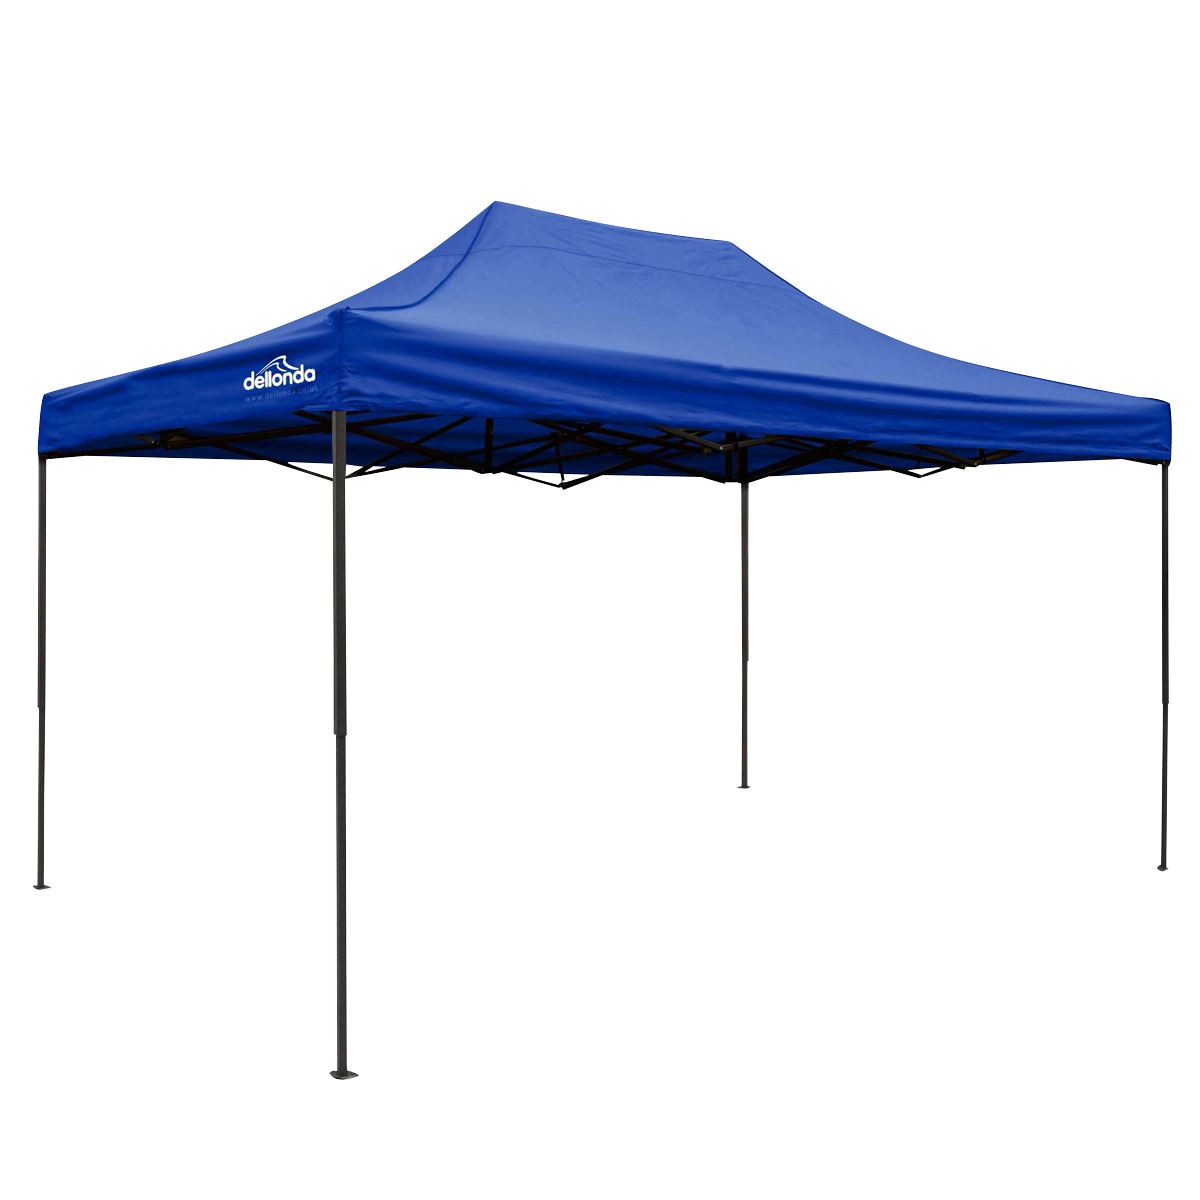 Dellonda Premium 3 x 4.5m Pop-Up Gazebo, Heavy Duty, PVC Coated, Water Resistant Fabric, Supplied with Carry Bag, Rope, Stakes & Weight Bags - Blue Canopy